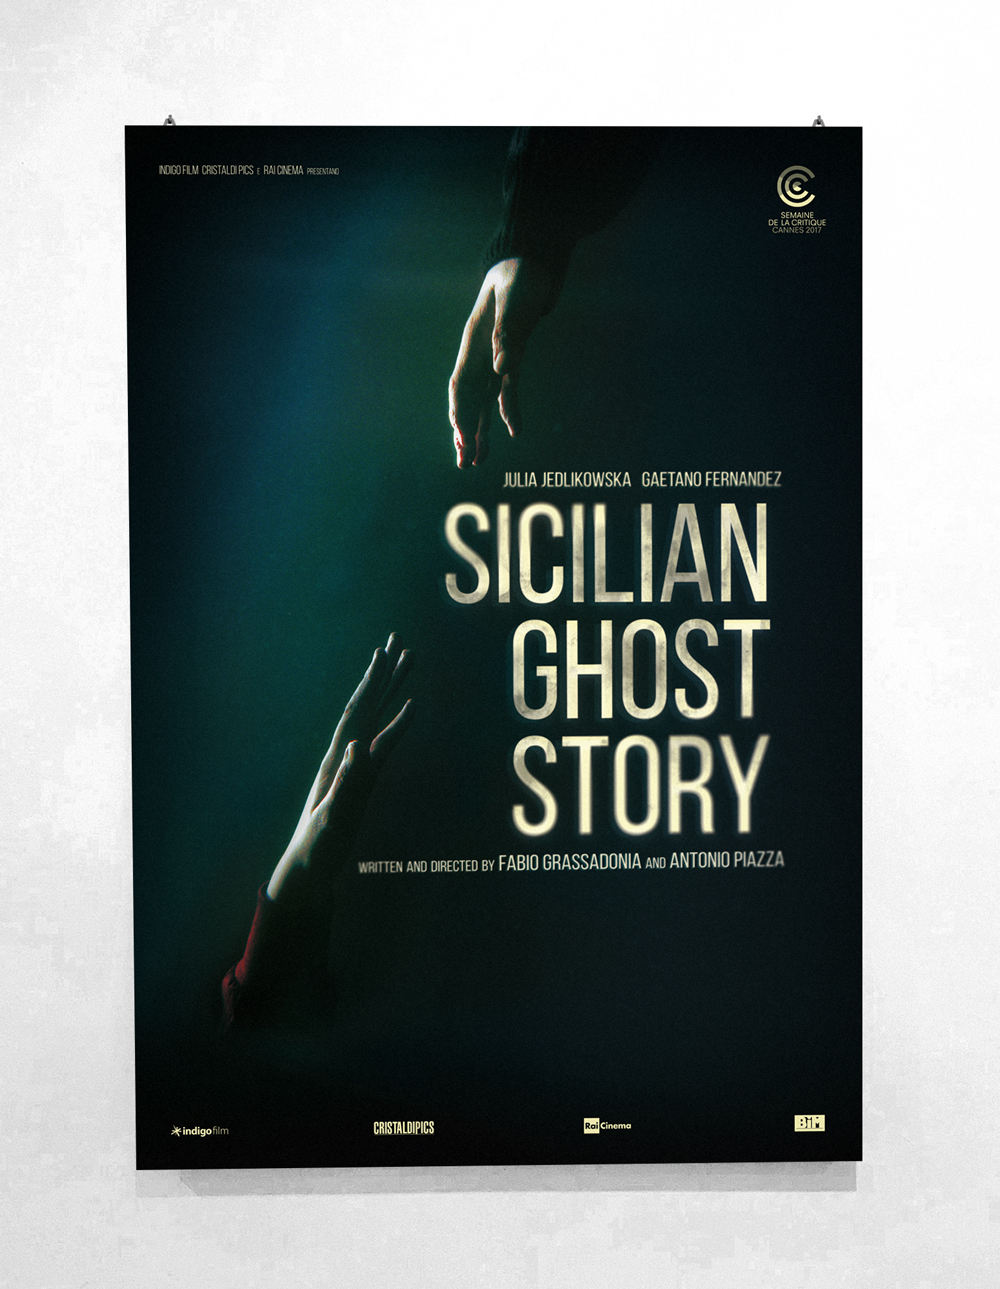 Sicilian Ghost Story - Directed by Fabio Grassadonia and Antonio Piazza - Official Poster